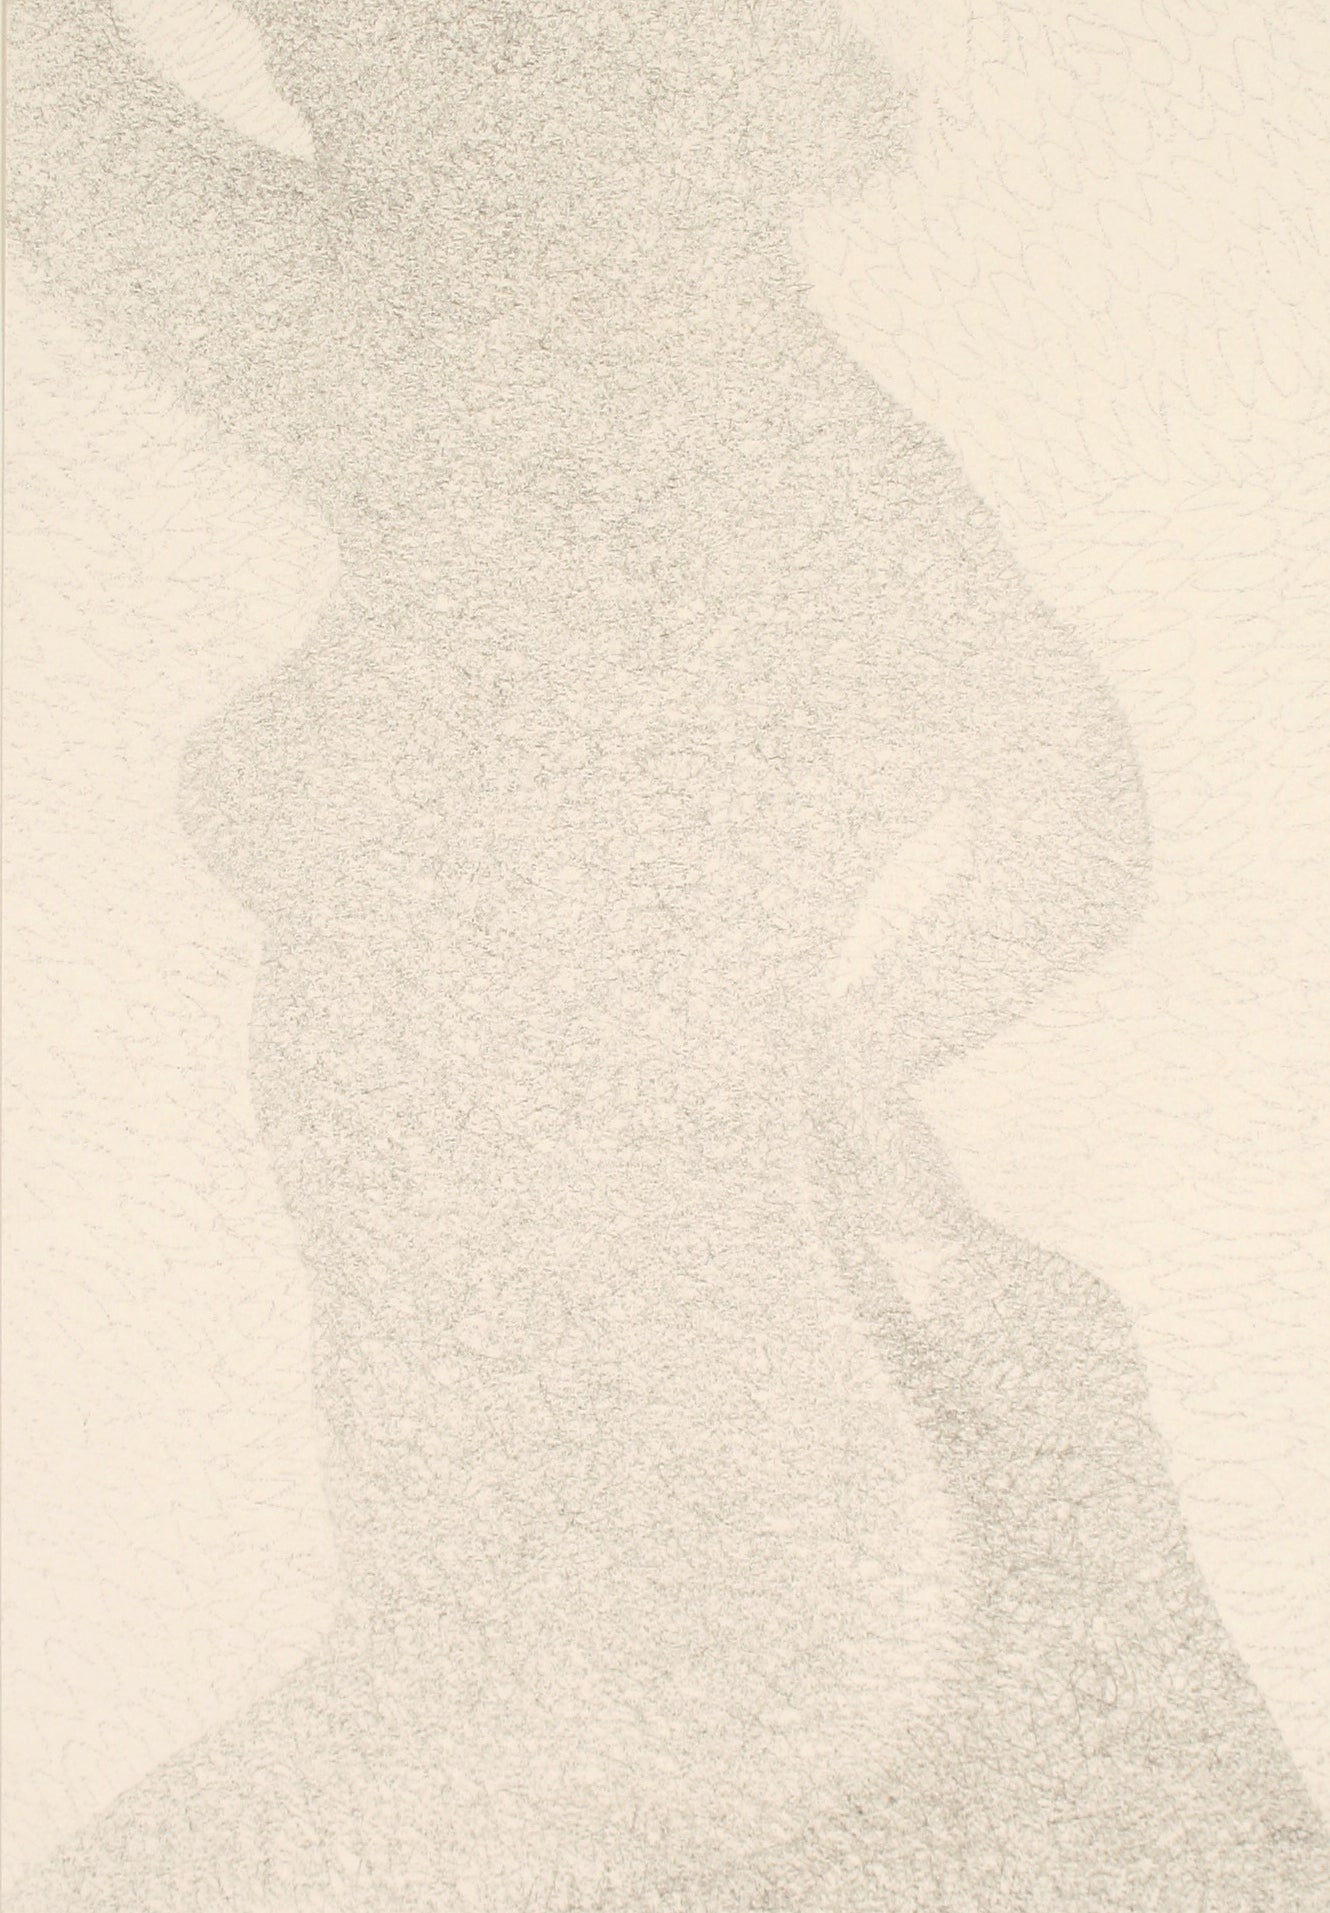 Shadow of a Woman <br>Late 20th Century Graphite <br><br>#71540